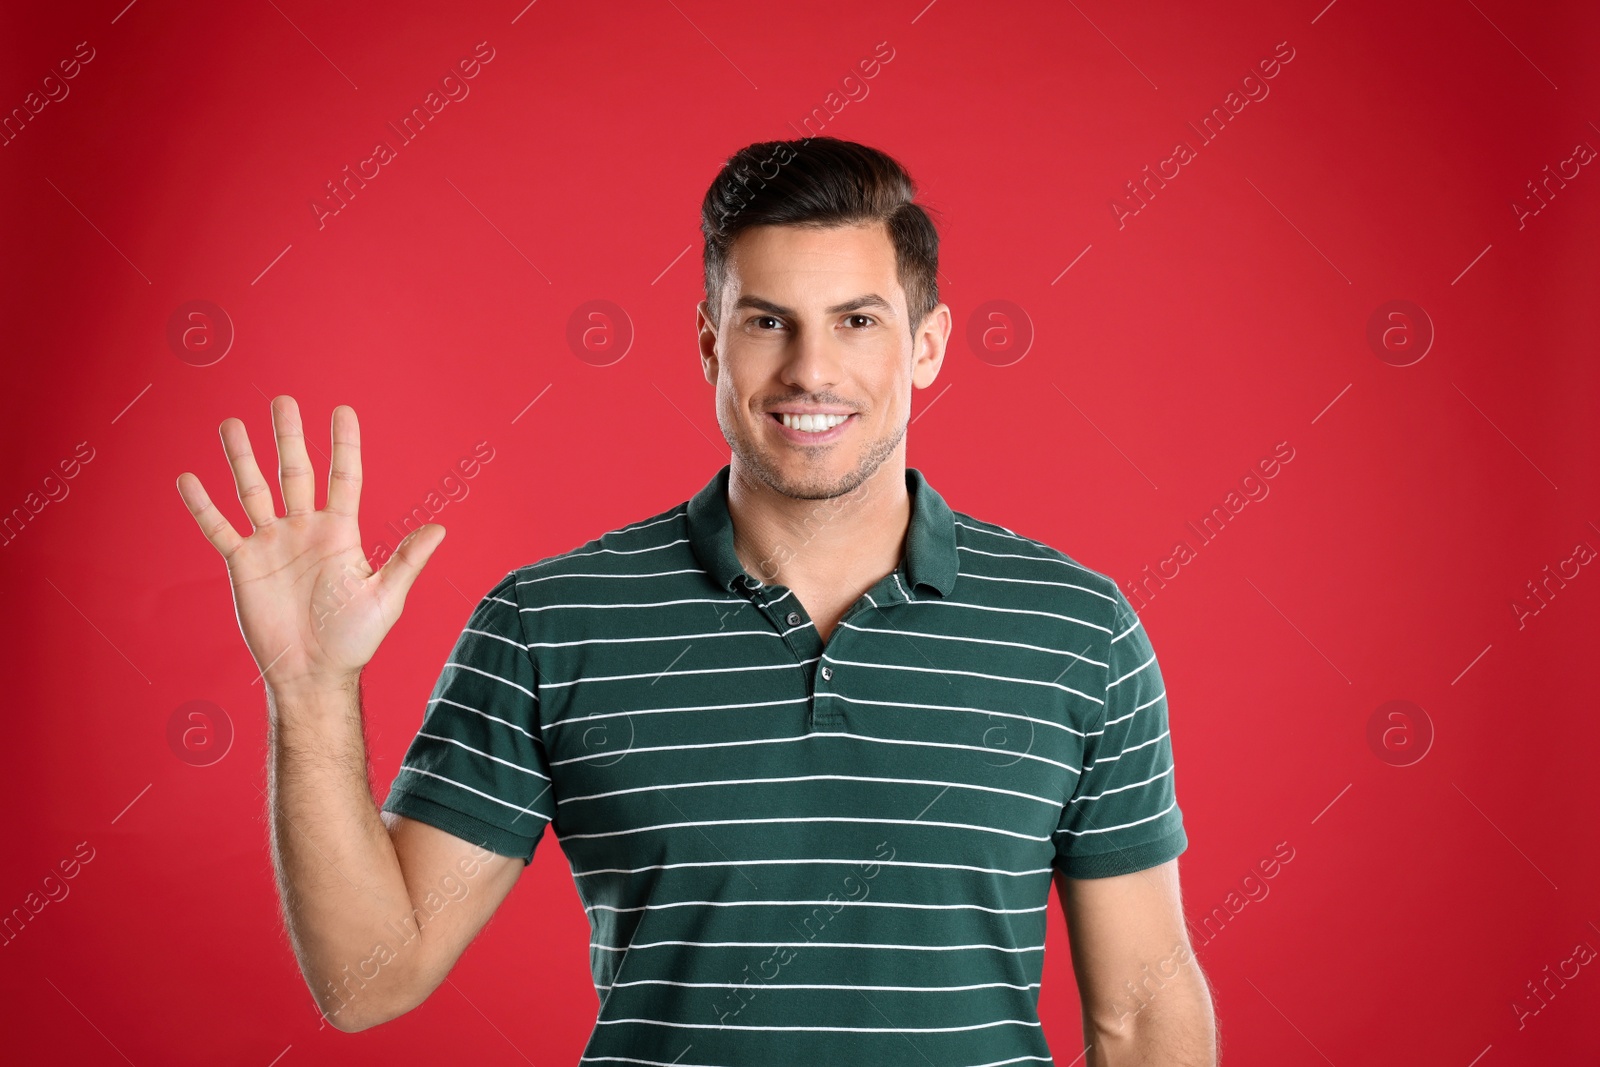 Photo of Man showing number five with his hand on red background